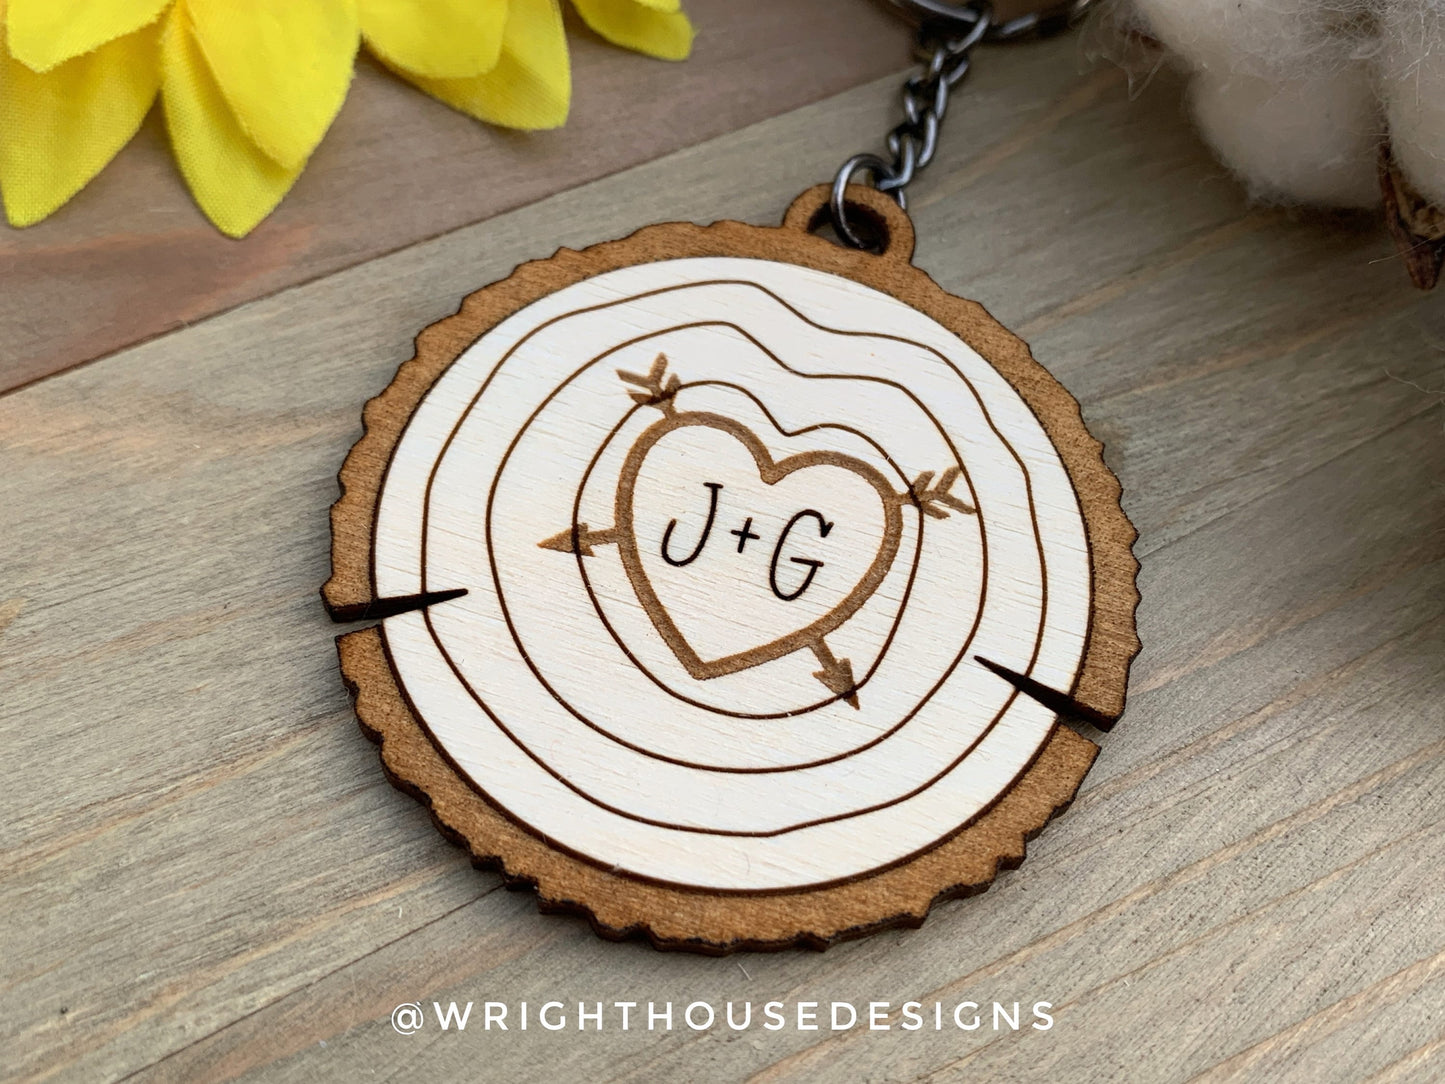 Couples Carved Wood Slice Keychain Set For Valentine's Day - His and Her Personalized Gifts - Digital SVG Cut Files For Glowforge Lasers